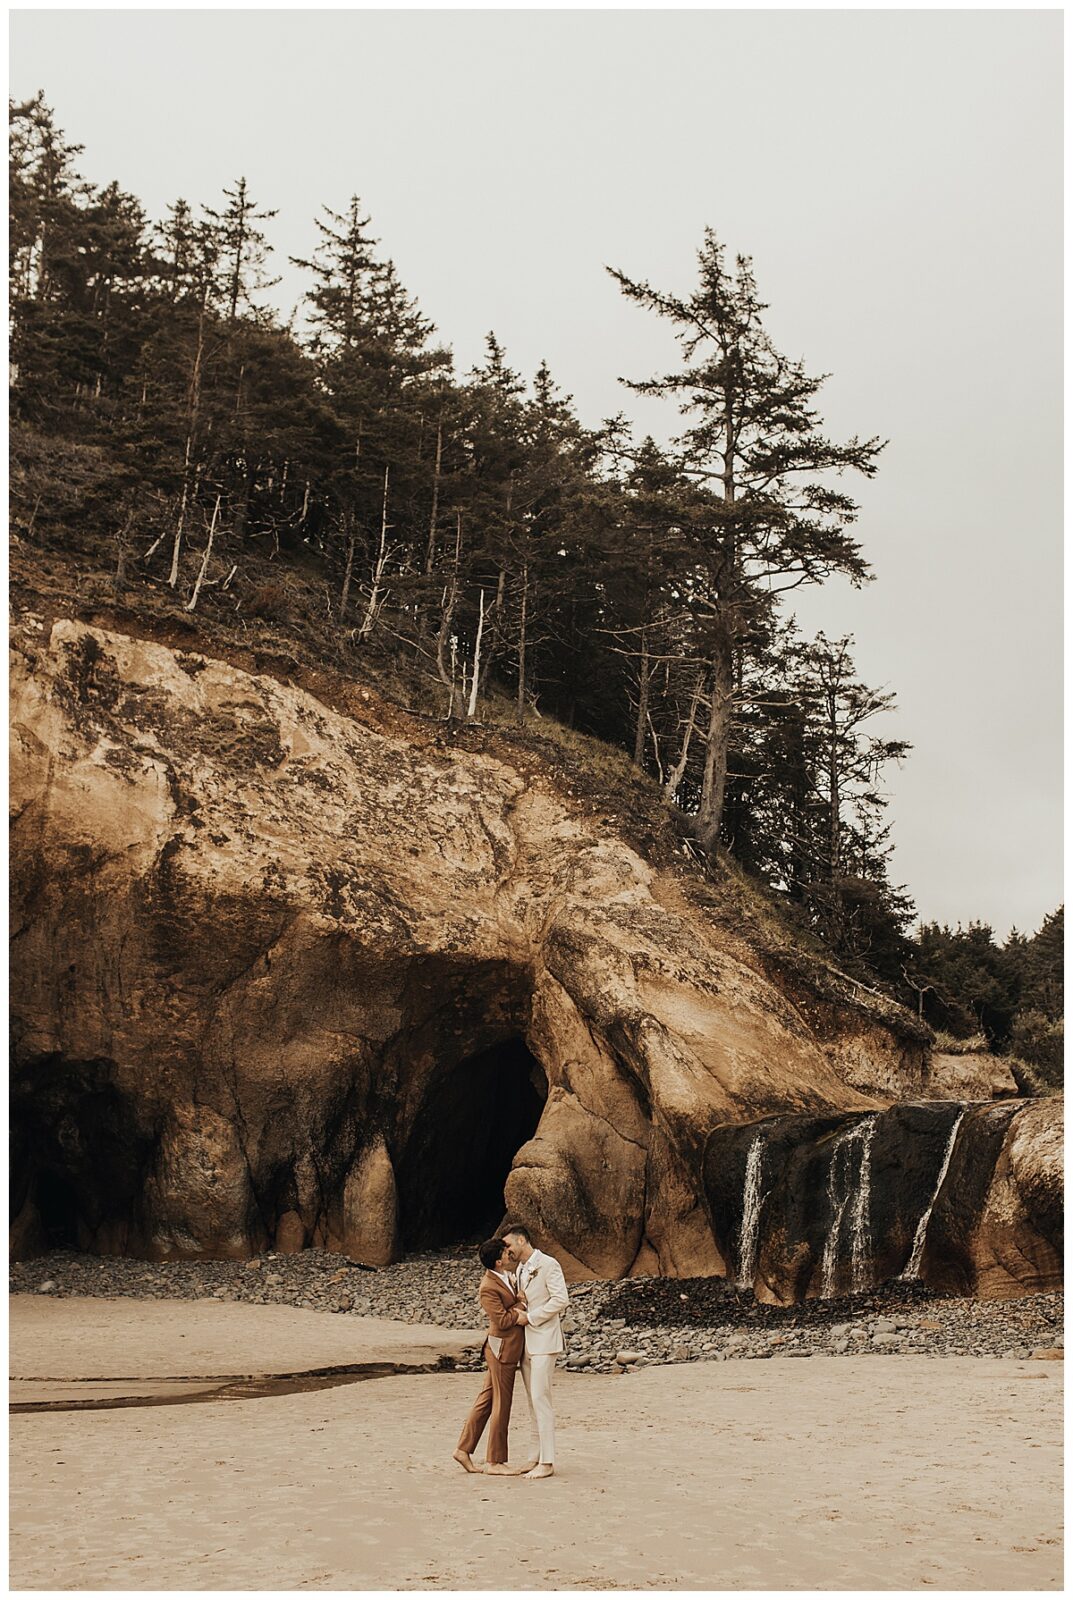 Boho same sex marriage in the beautiful state of Oregon at Hug Point on the west coast. Gay couple wedding day suit inspiration.